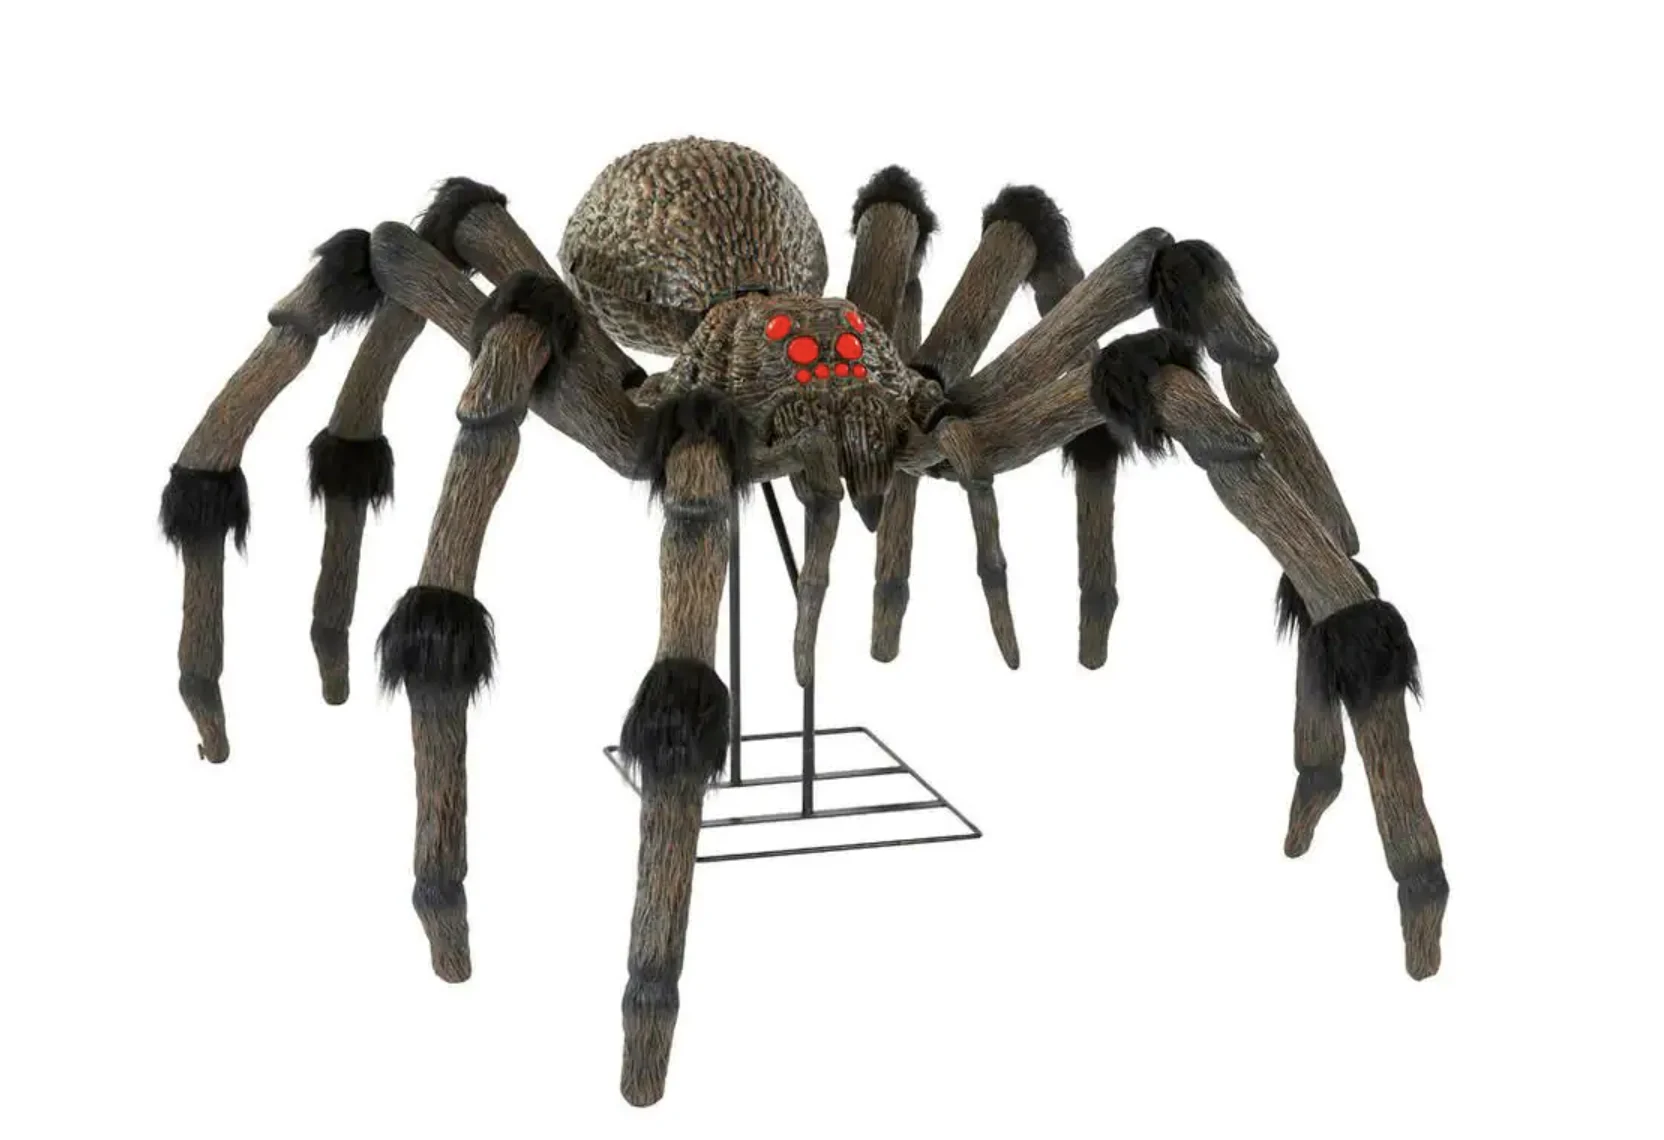 Home Depot Is Selling A 7-Foot Spider You Can Put In Your Yard For ...